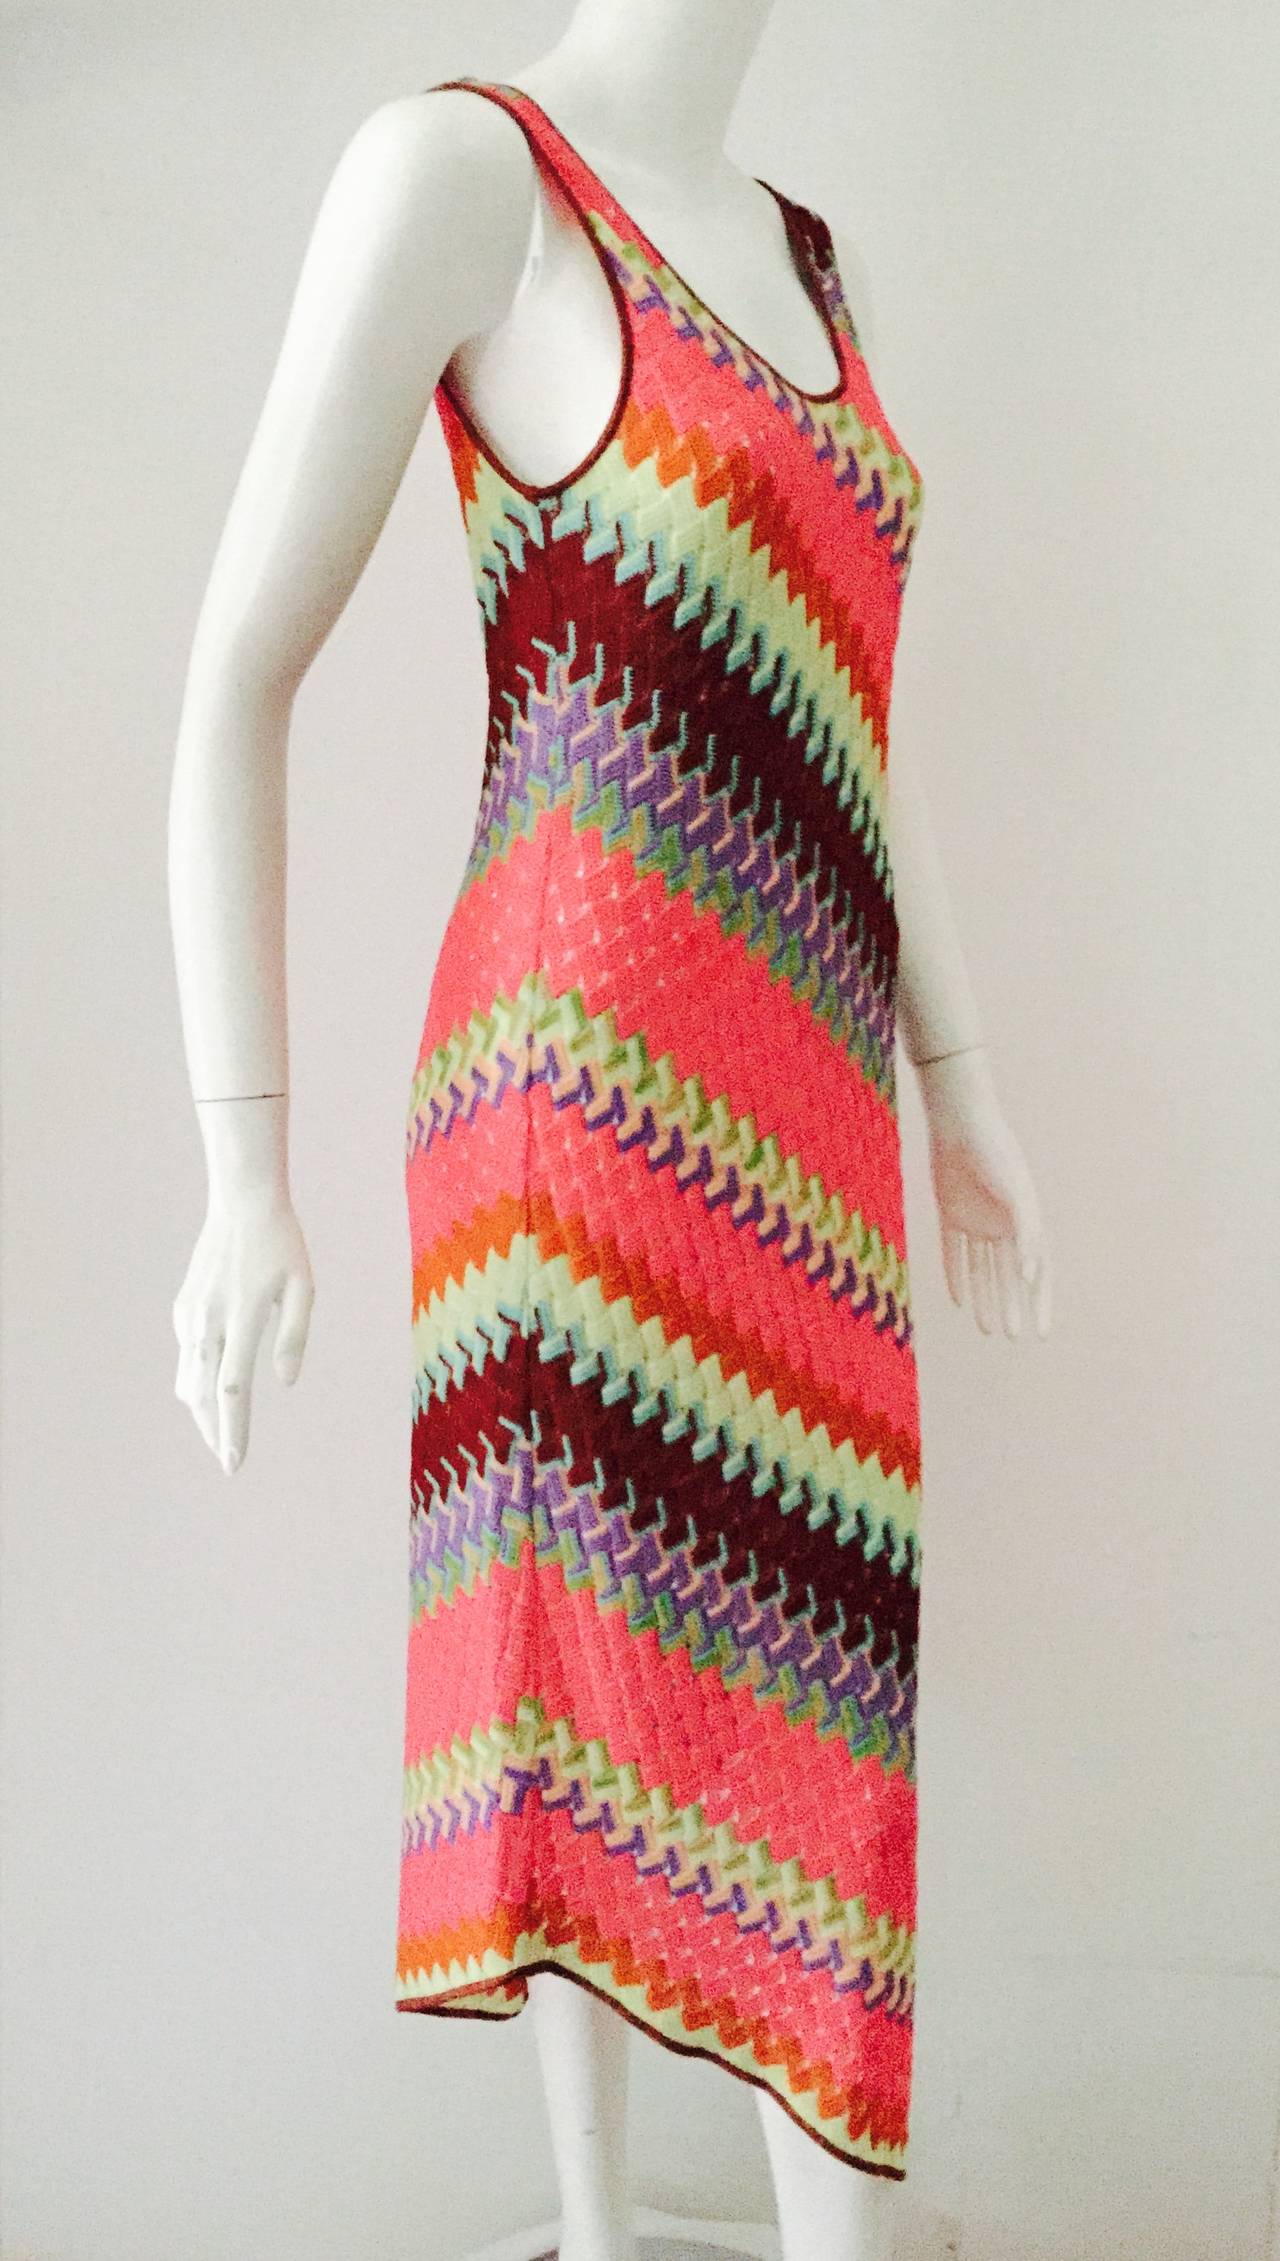 Multicolor Missoni Asymmetric Sheath Dress is true to the legacy of Tai and Rosita! No wonder this duo was selected to design uniforms for the Italian Olympic team. Features athletic tank sleeves and body-conscious silhouette enhanced by diagonal